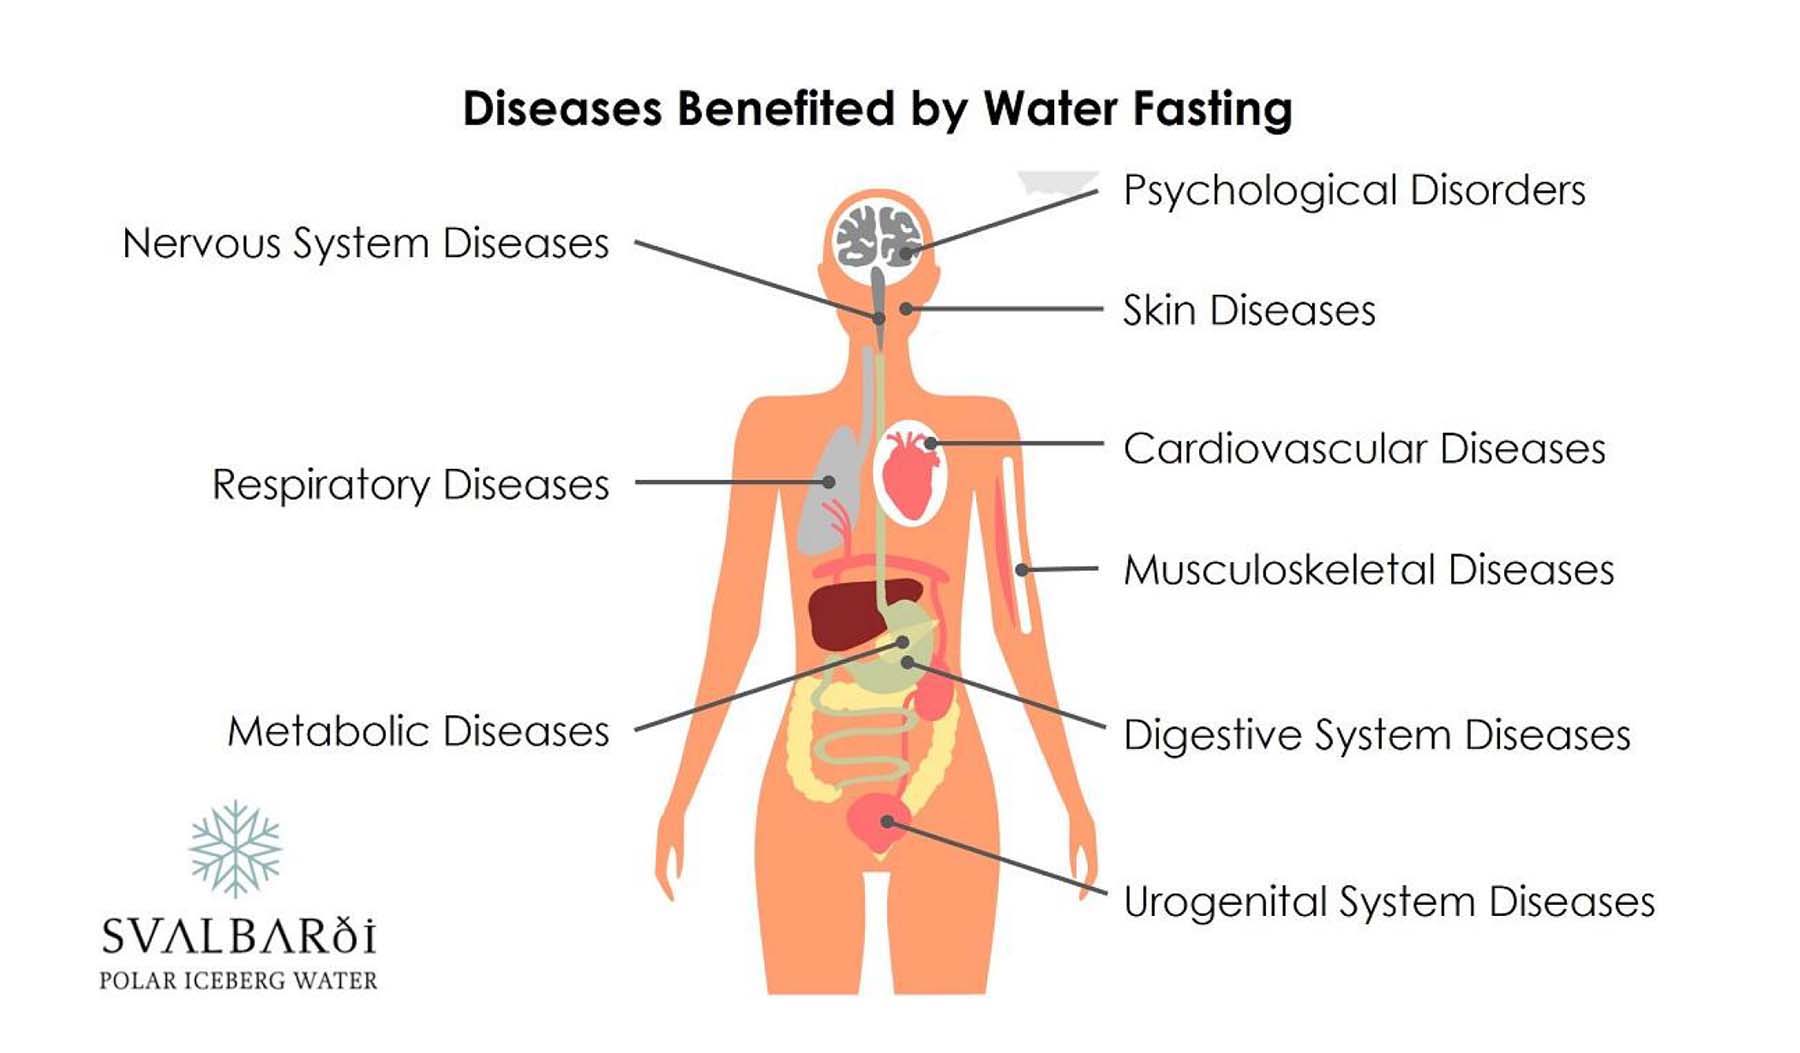 Can Water Fasting Clean Arteries?